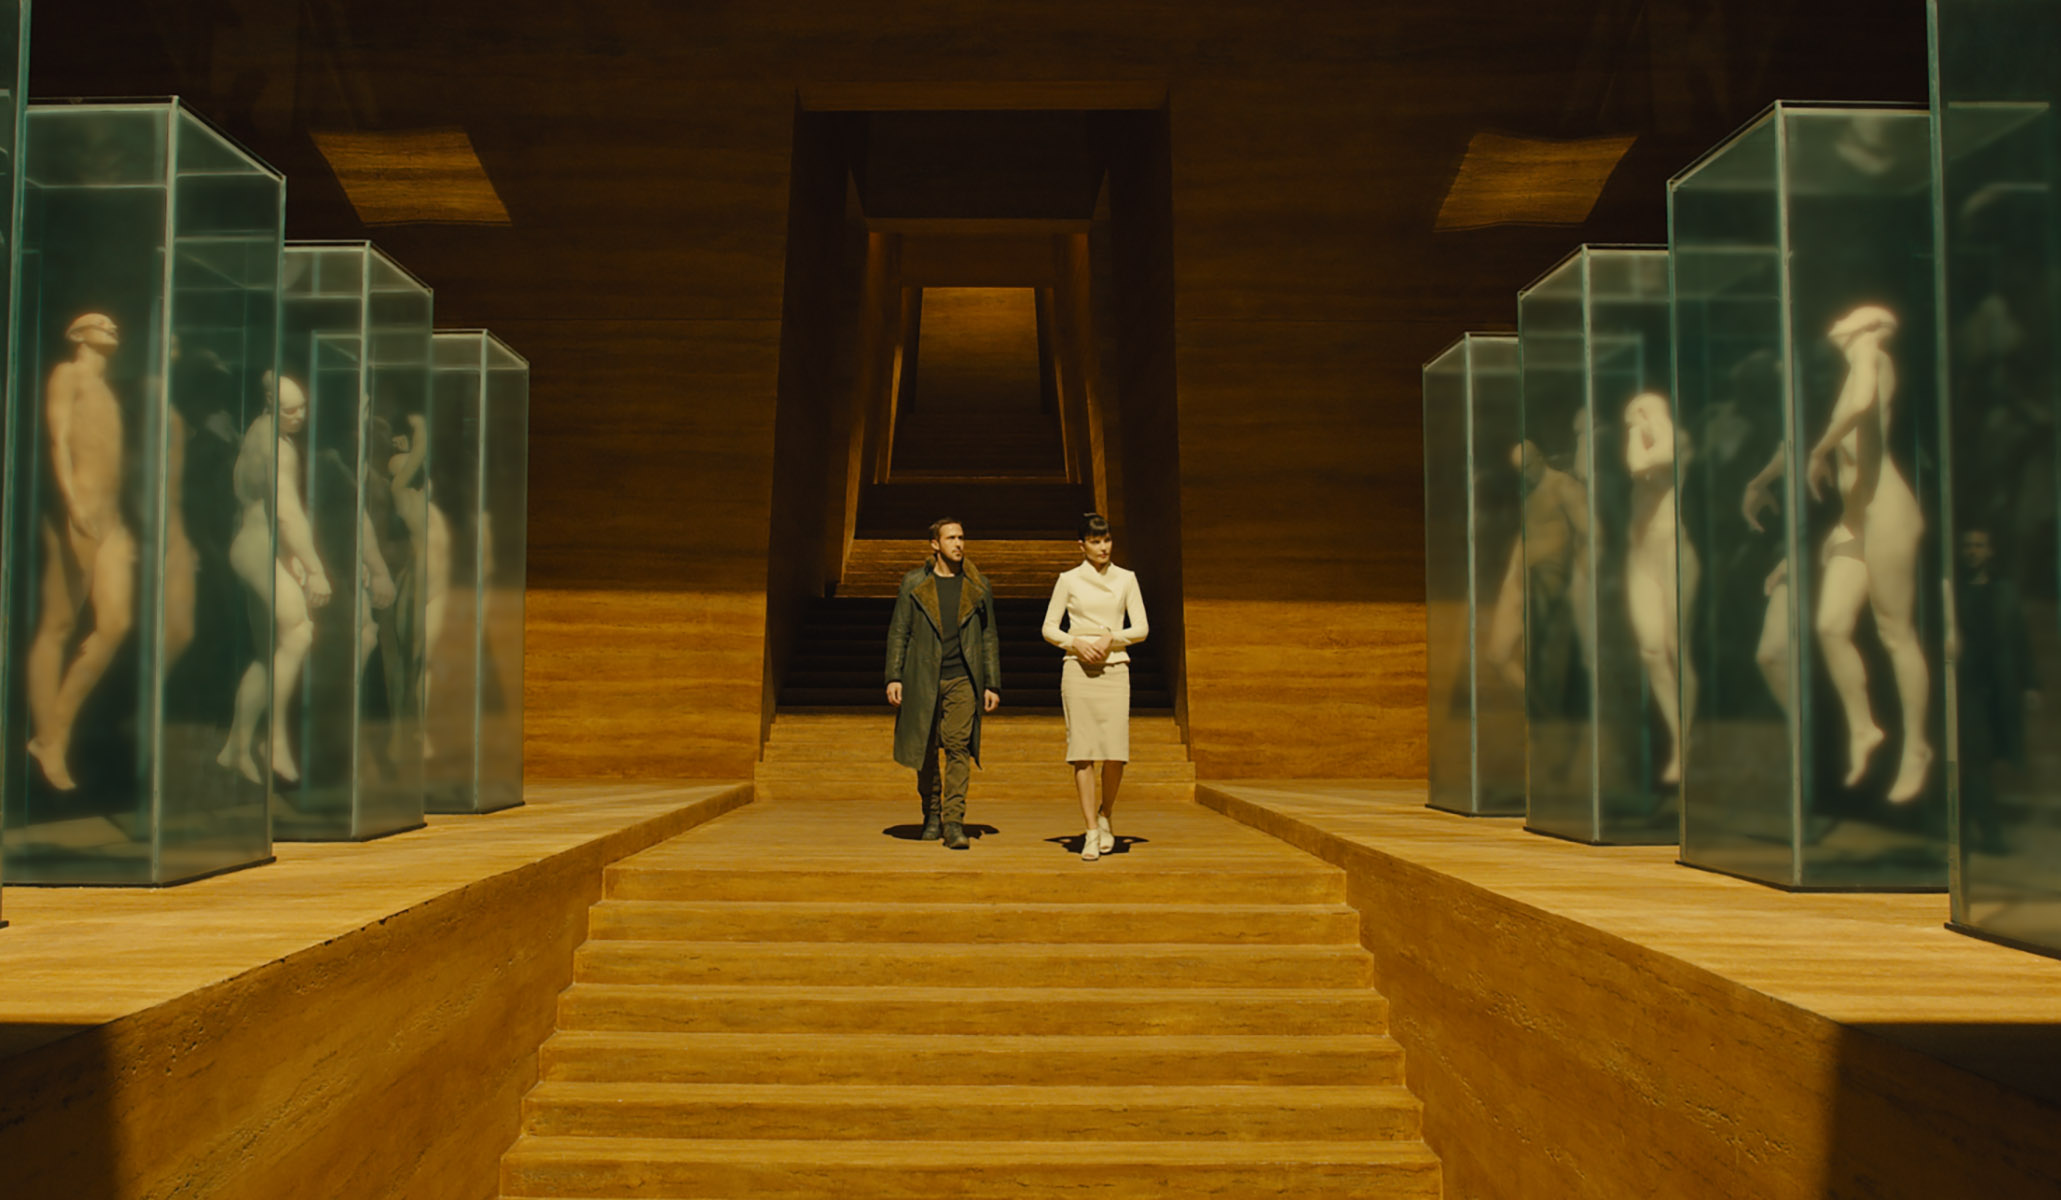 (L-R) RYAN GOSLING as K and SYLVIA HOEKS as Luv in Alcon Entertainment's action thriller "BLADE RUNNER 2049," a Warner Bros. Pictures and Sony Pictures Entertainment release, domestic distribution by Warner Bros. Pictures and international distribution by Sony Pictures. Photo Credit: Courtesy of Alcon Entertainment. Copyright: © 2017 ALCON ENTERTAINMENT, LLC